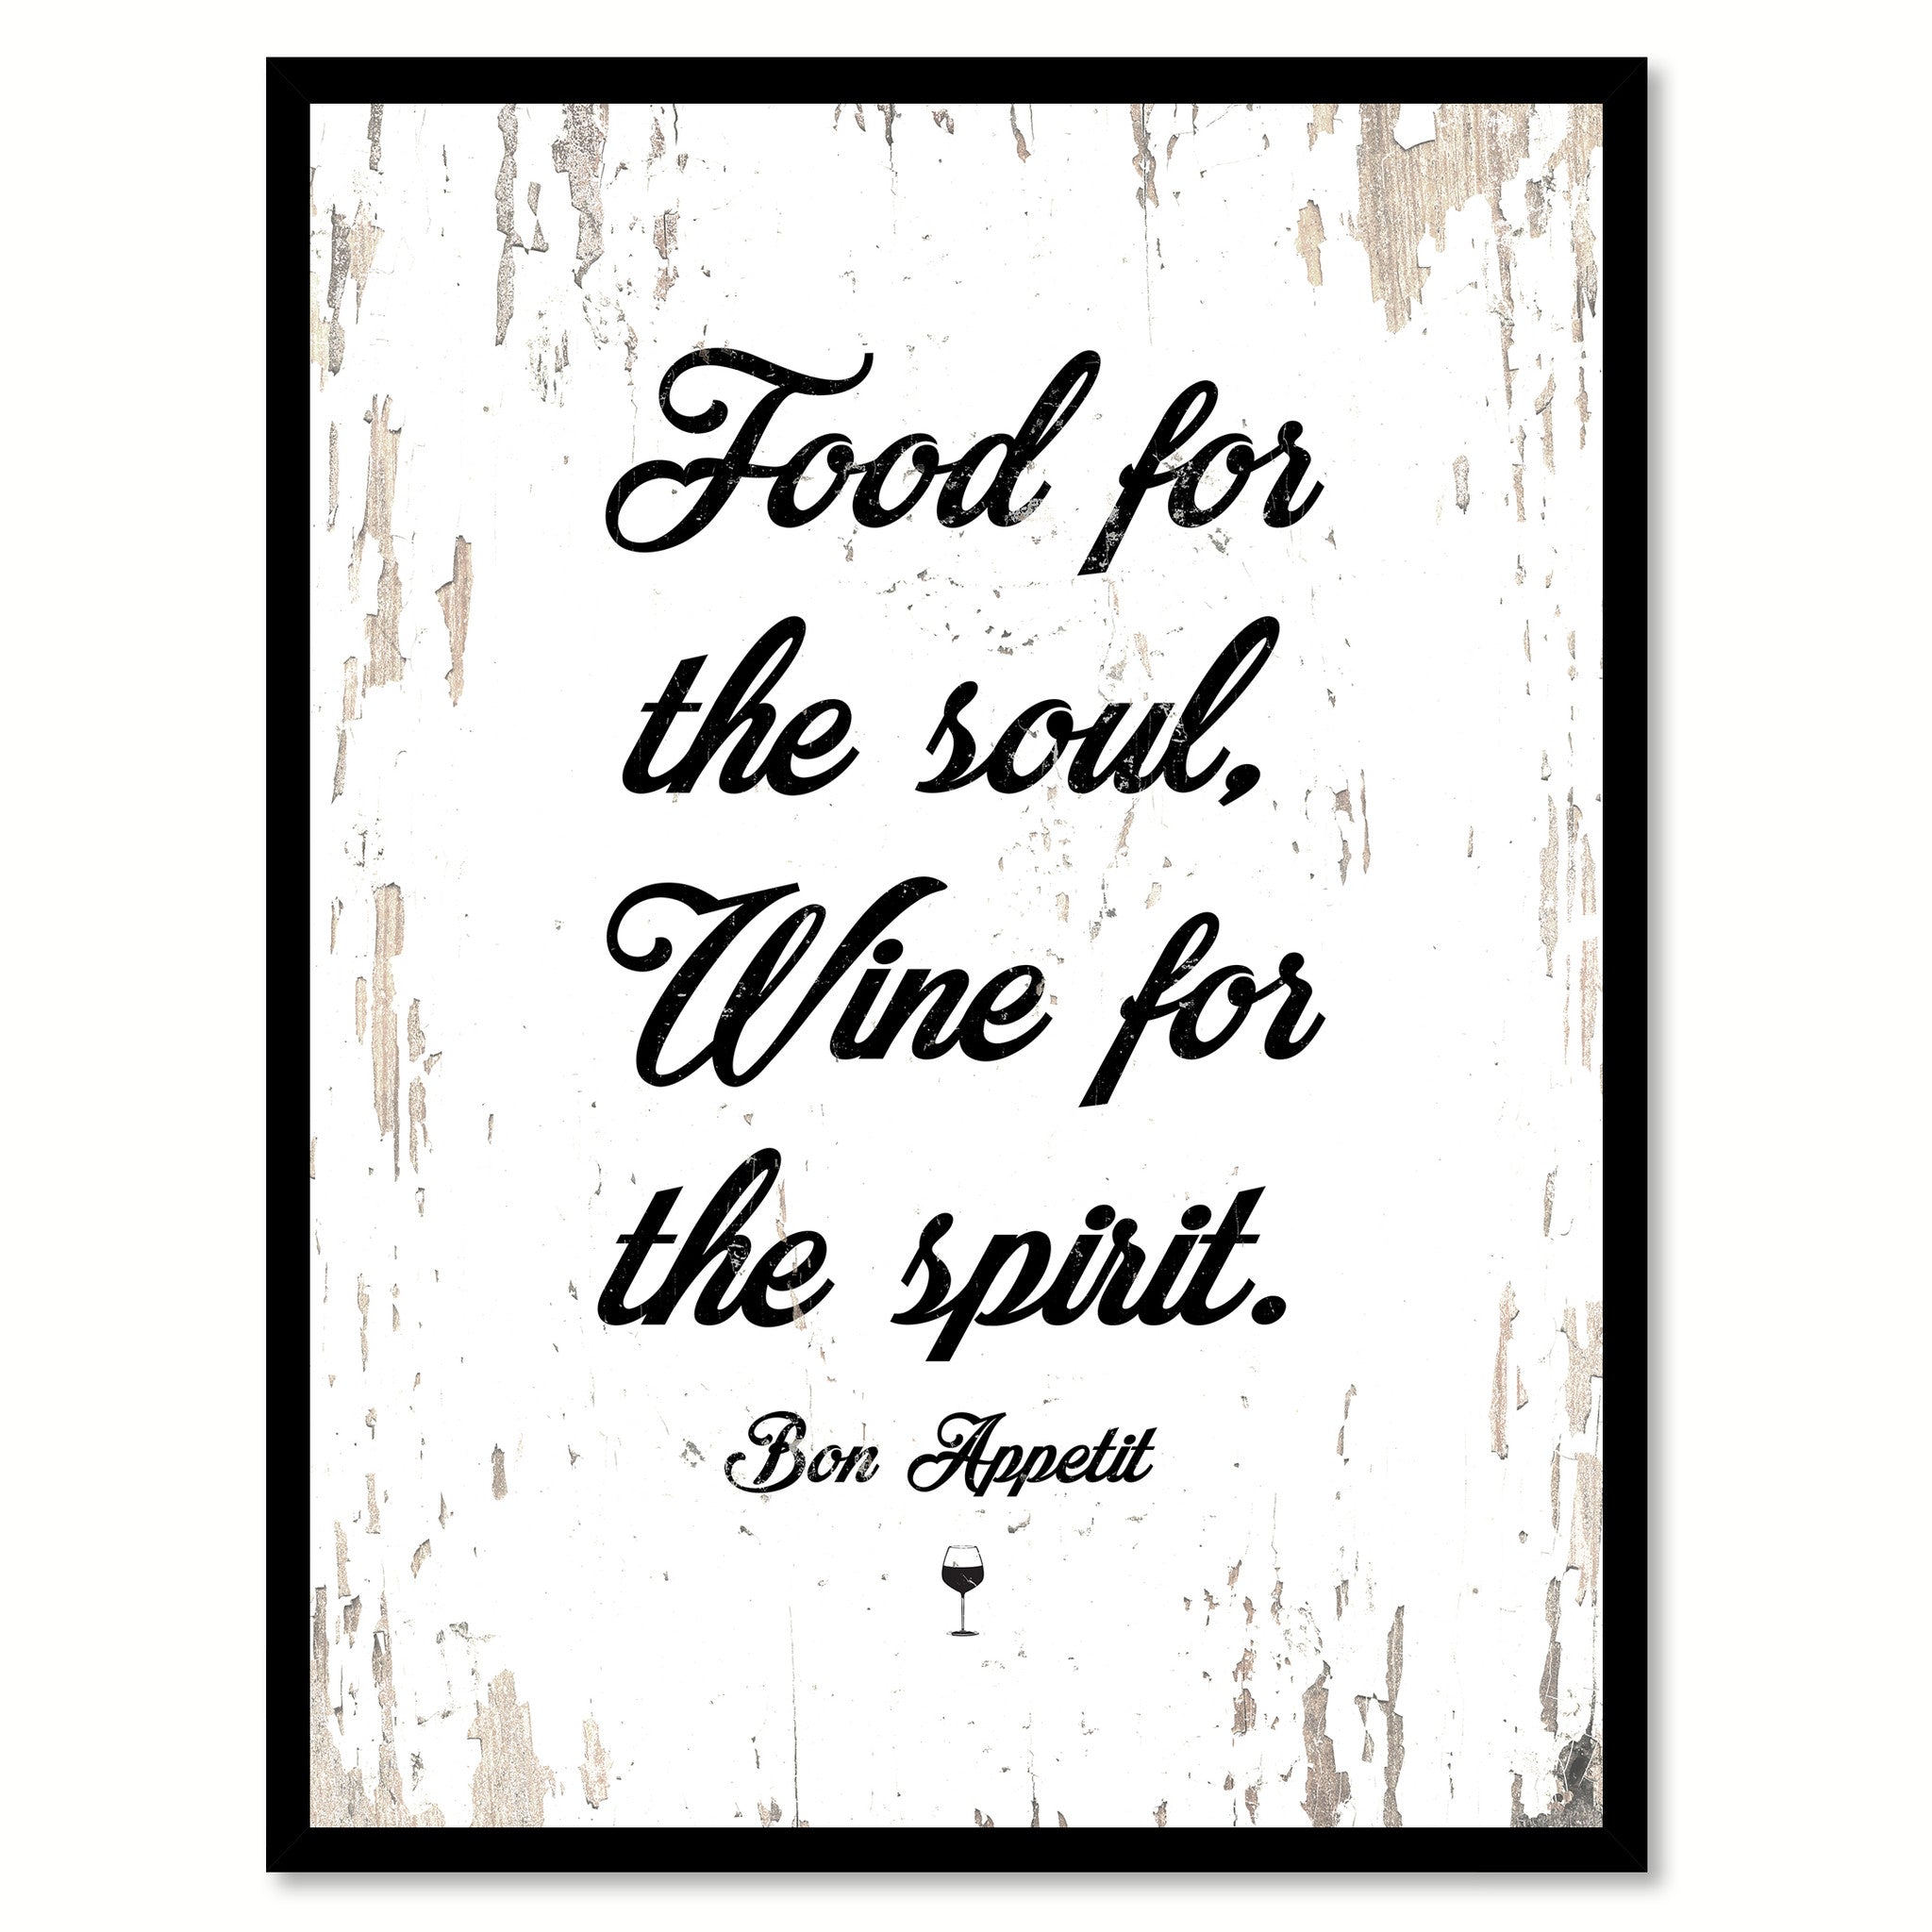 Food For The Soul, Wine For The Spirit Quote Saying Canvas Print with Picture Frame